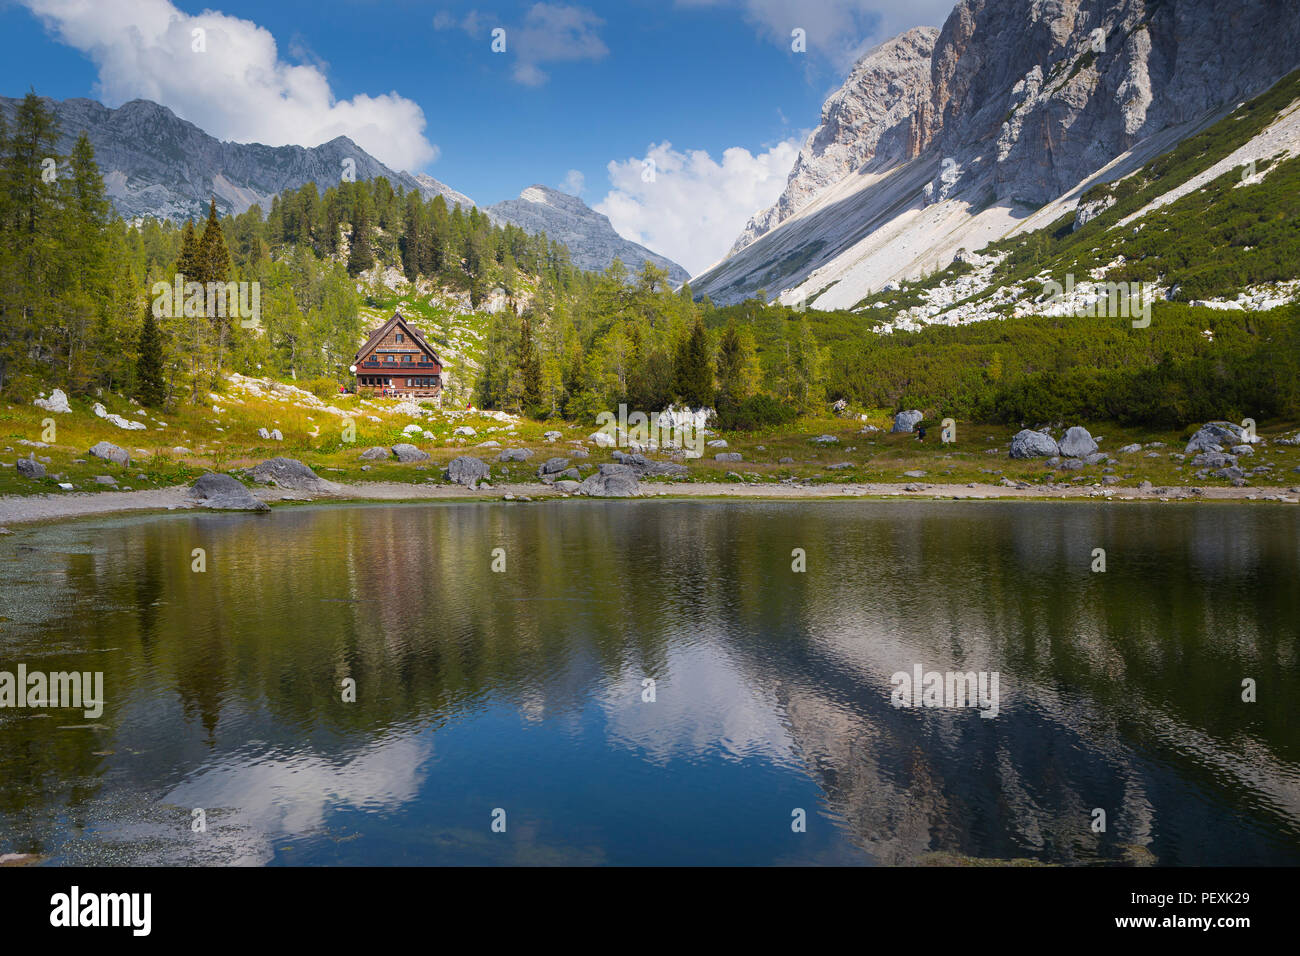 Mountain hut in Valley of the Seven lakes, Triglav National Park, Slovenia Stock Photo